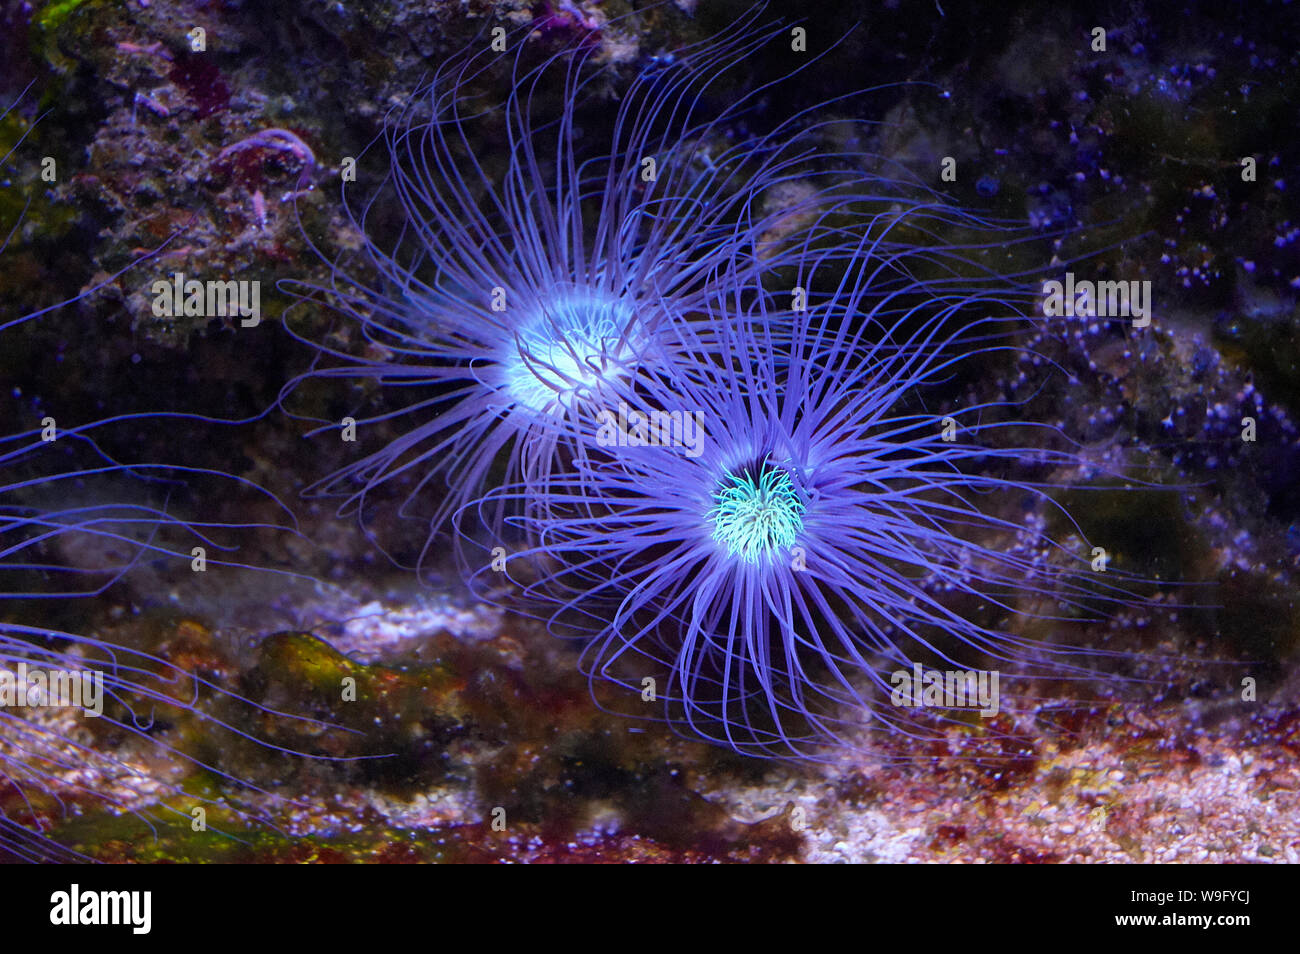 Glowing Fluorescent Blue Coral Reef Anemone Stock Photo